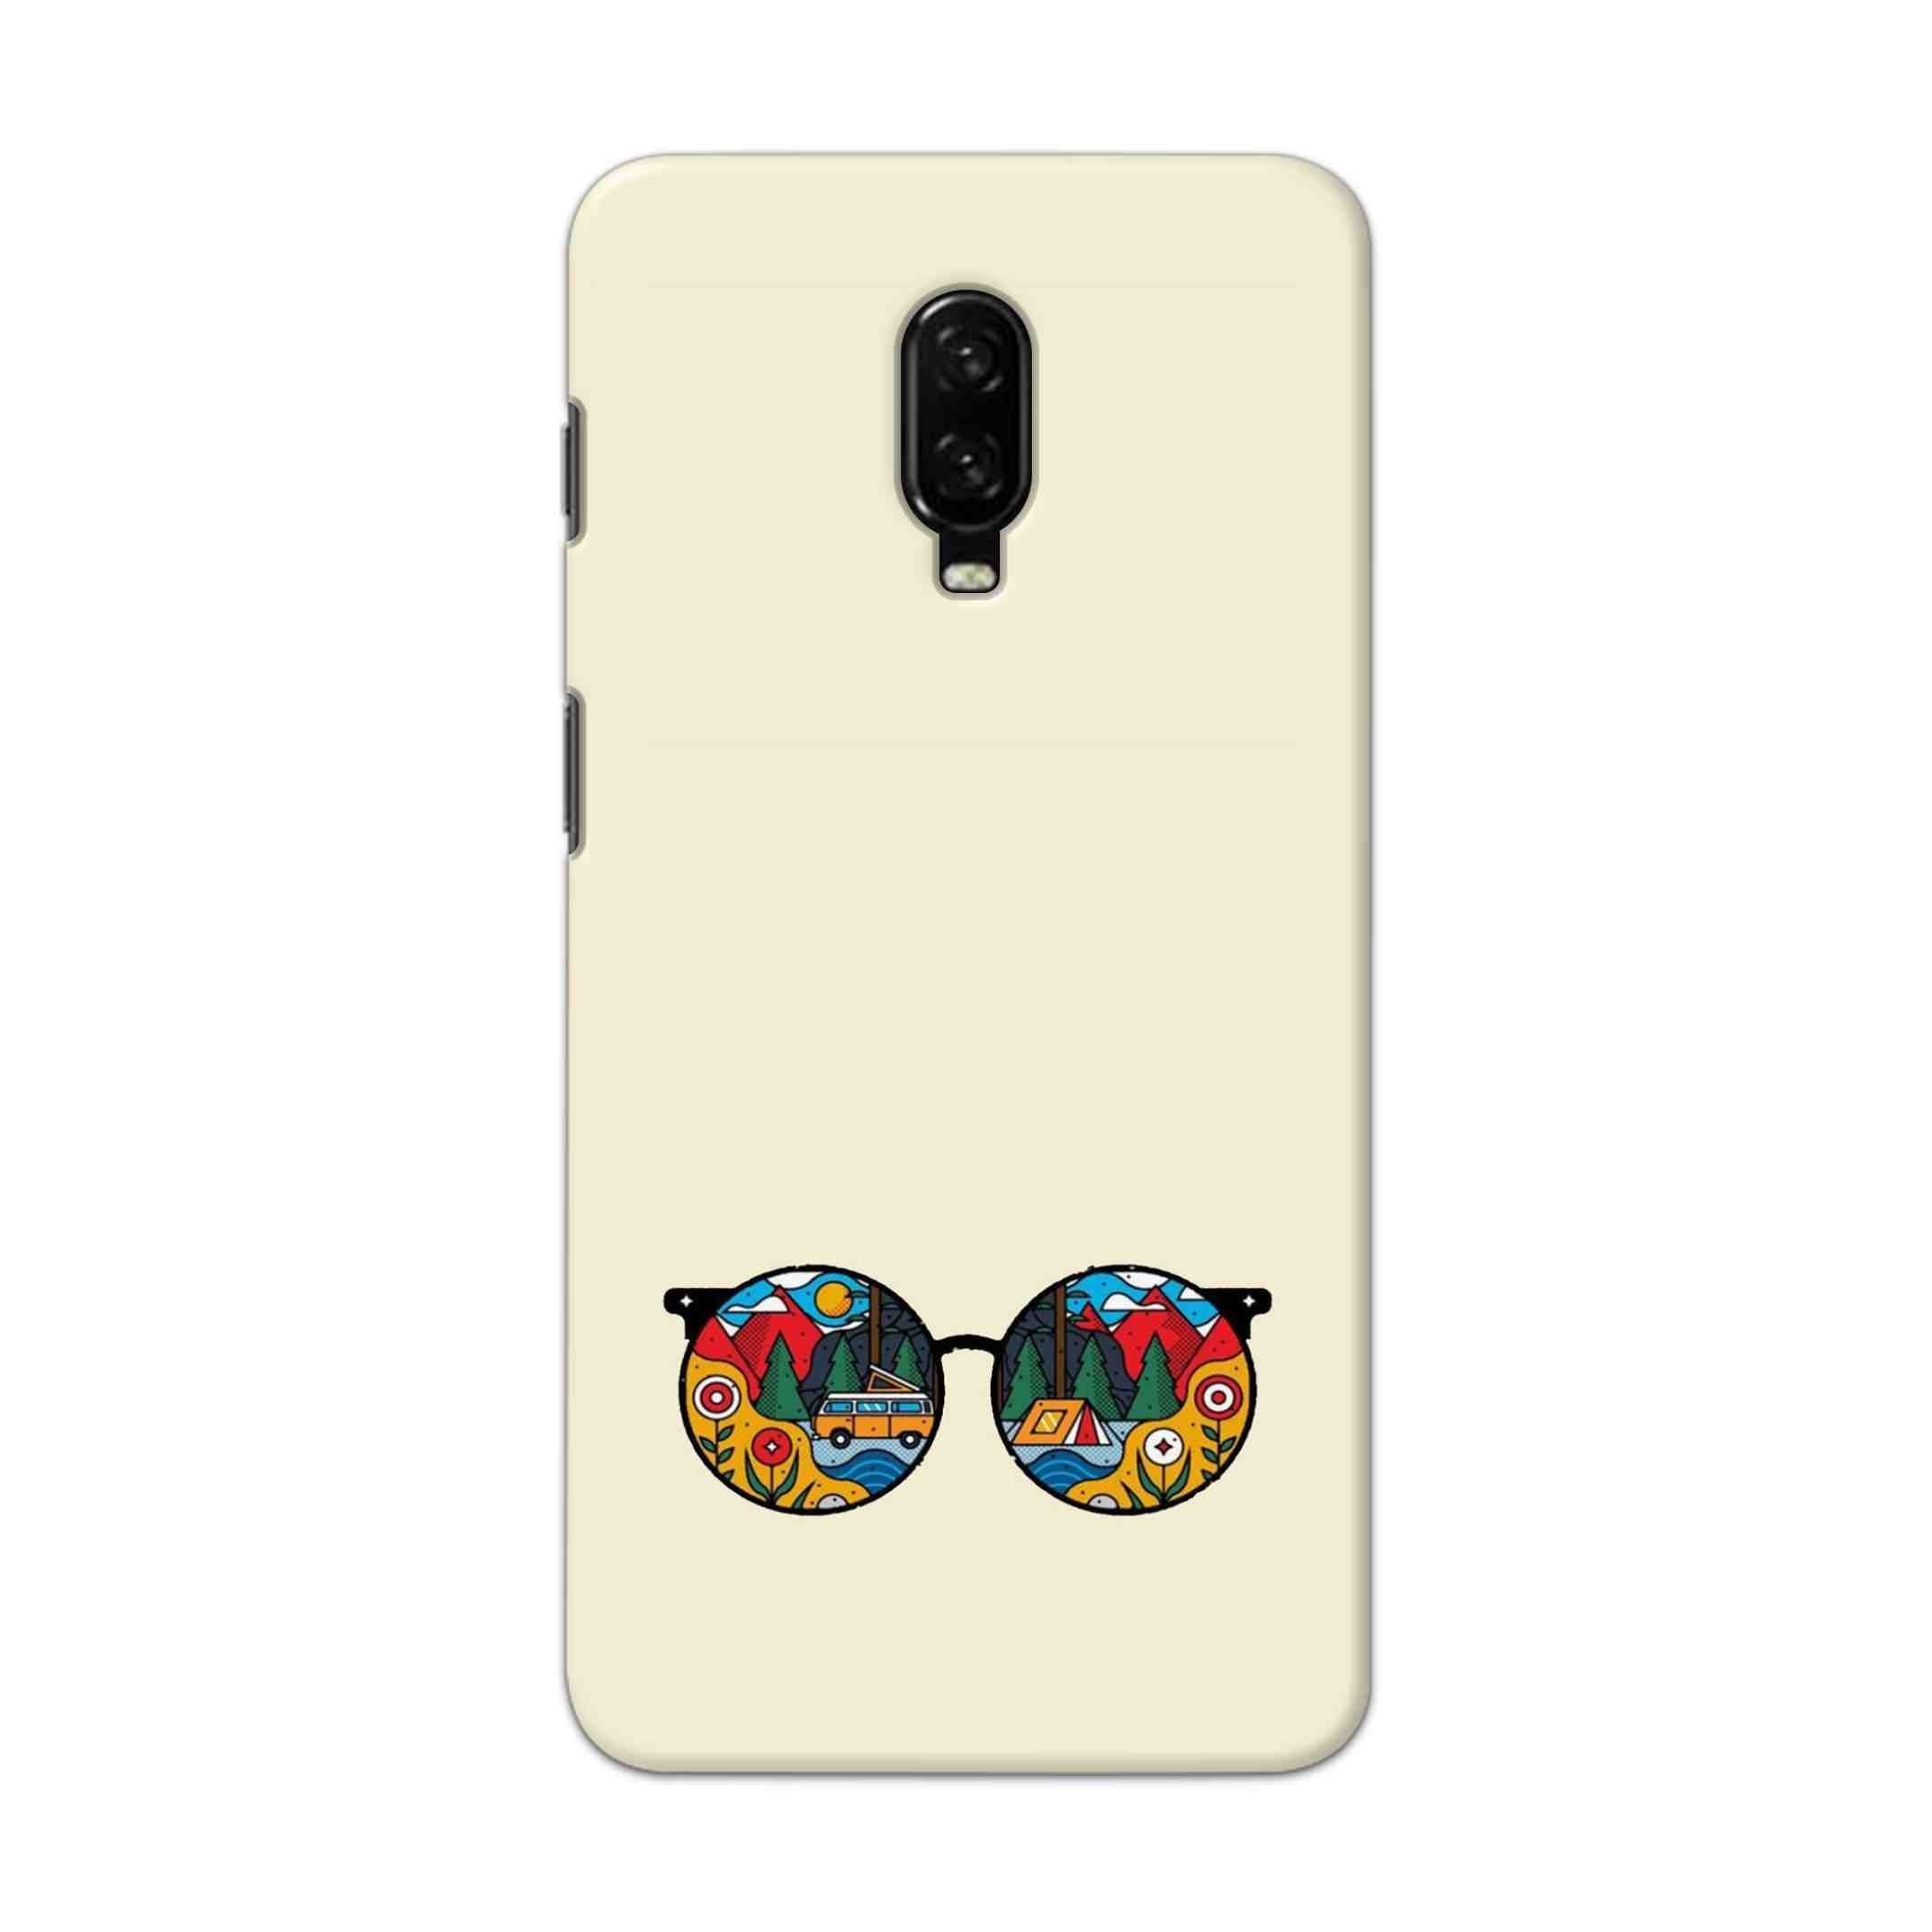 Buy Rainbow Sunglasses Hard Back Mobile Phone Case Cover For OnePlus 6T Online